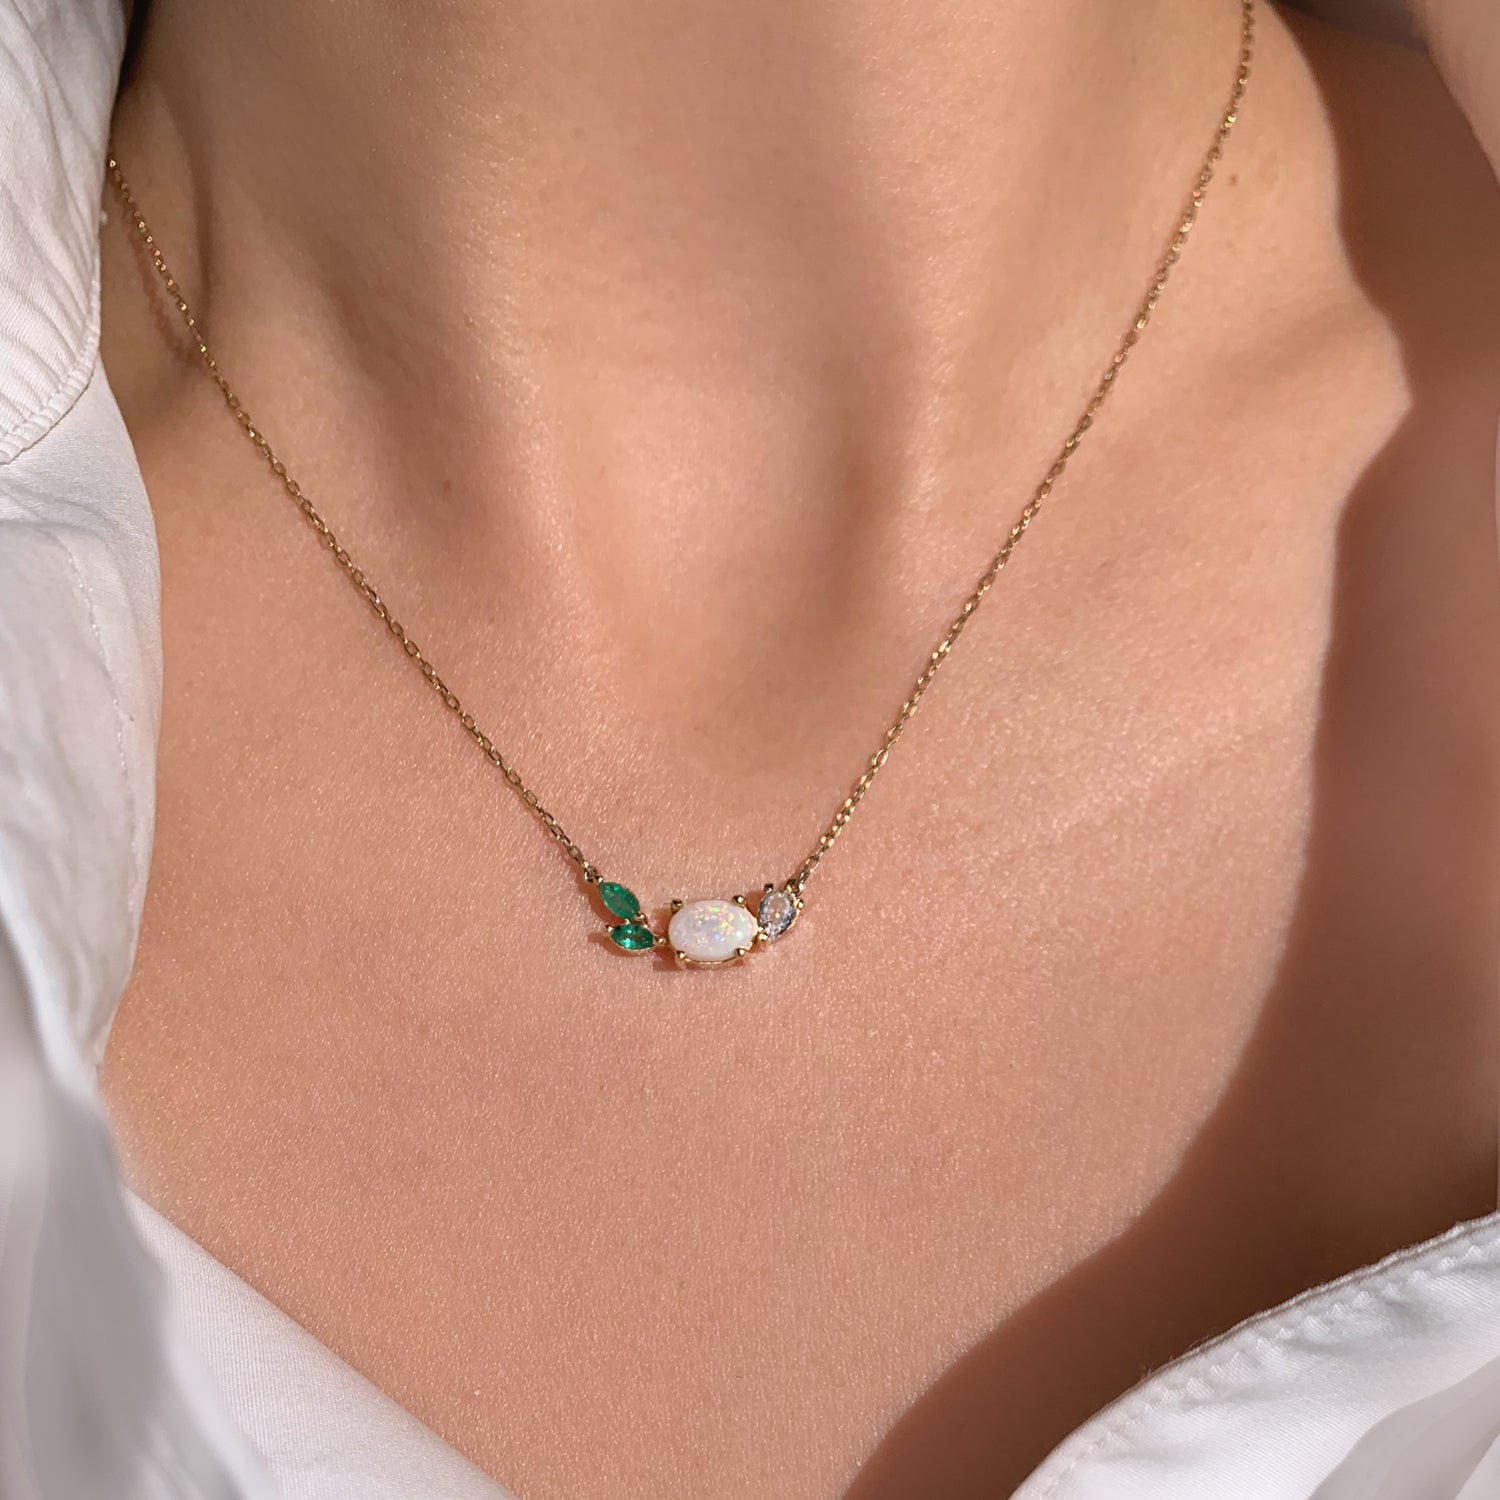 This beautiful, 14K gold-cast necklace is inspired by the tranquility of a lush evergreen. Adorned with a cluster of gorgeous gemstones, including an Australian opal and two emeralds, it's finished with a sparkly pear-cut lab diamond.